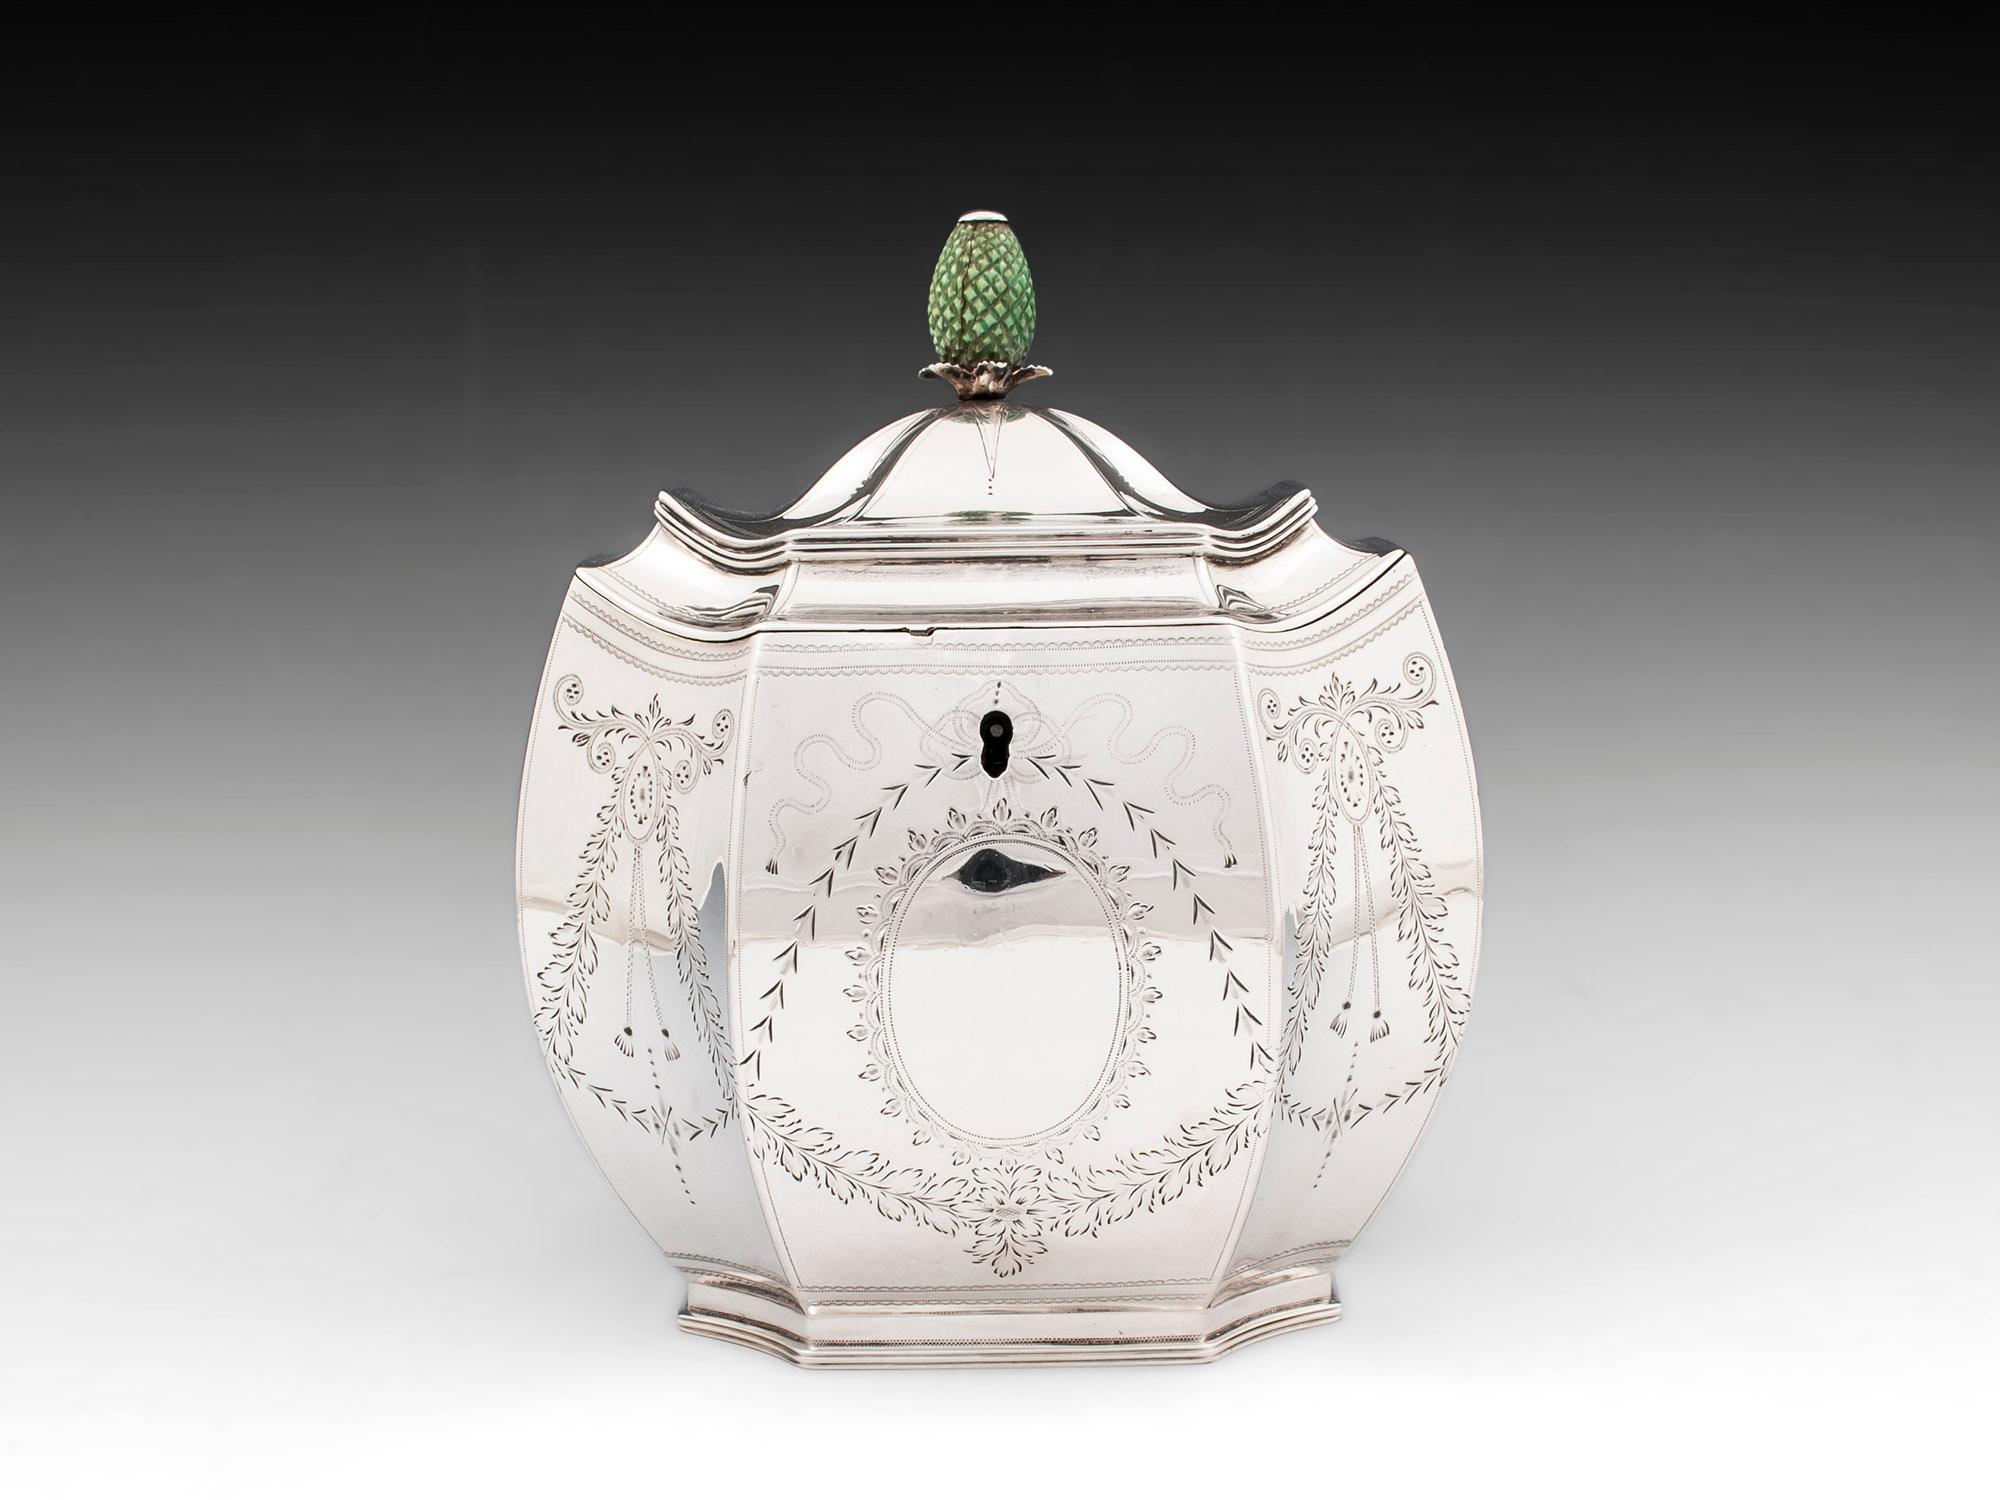 Wonderful bombe shape sterling silver tea caddy, with a green-stained bone handle in the form of a pineapple.
The body of the caddy is decorated with engraved floral garlands, swags and ribbons. The hinged lid opens to reveal a single divider